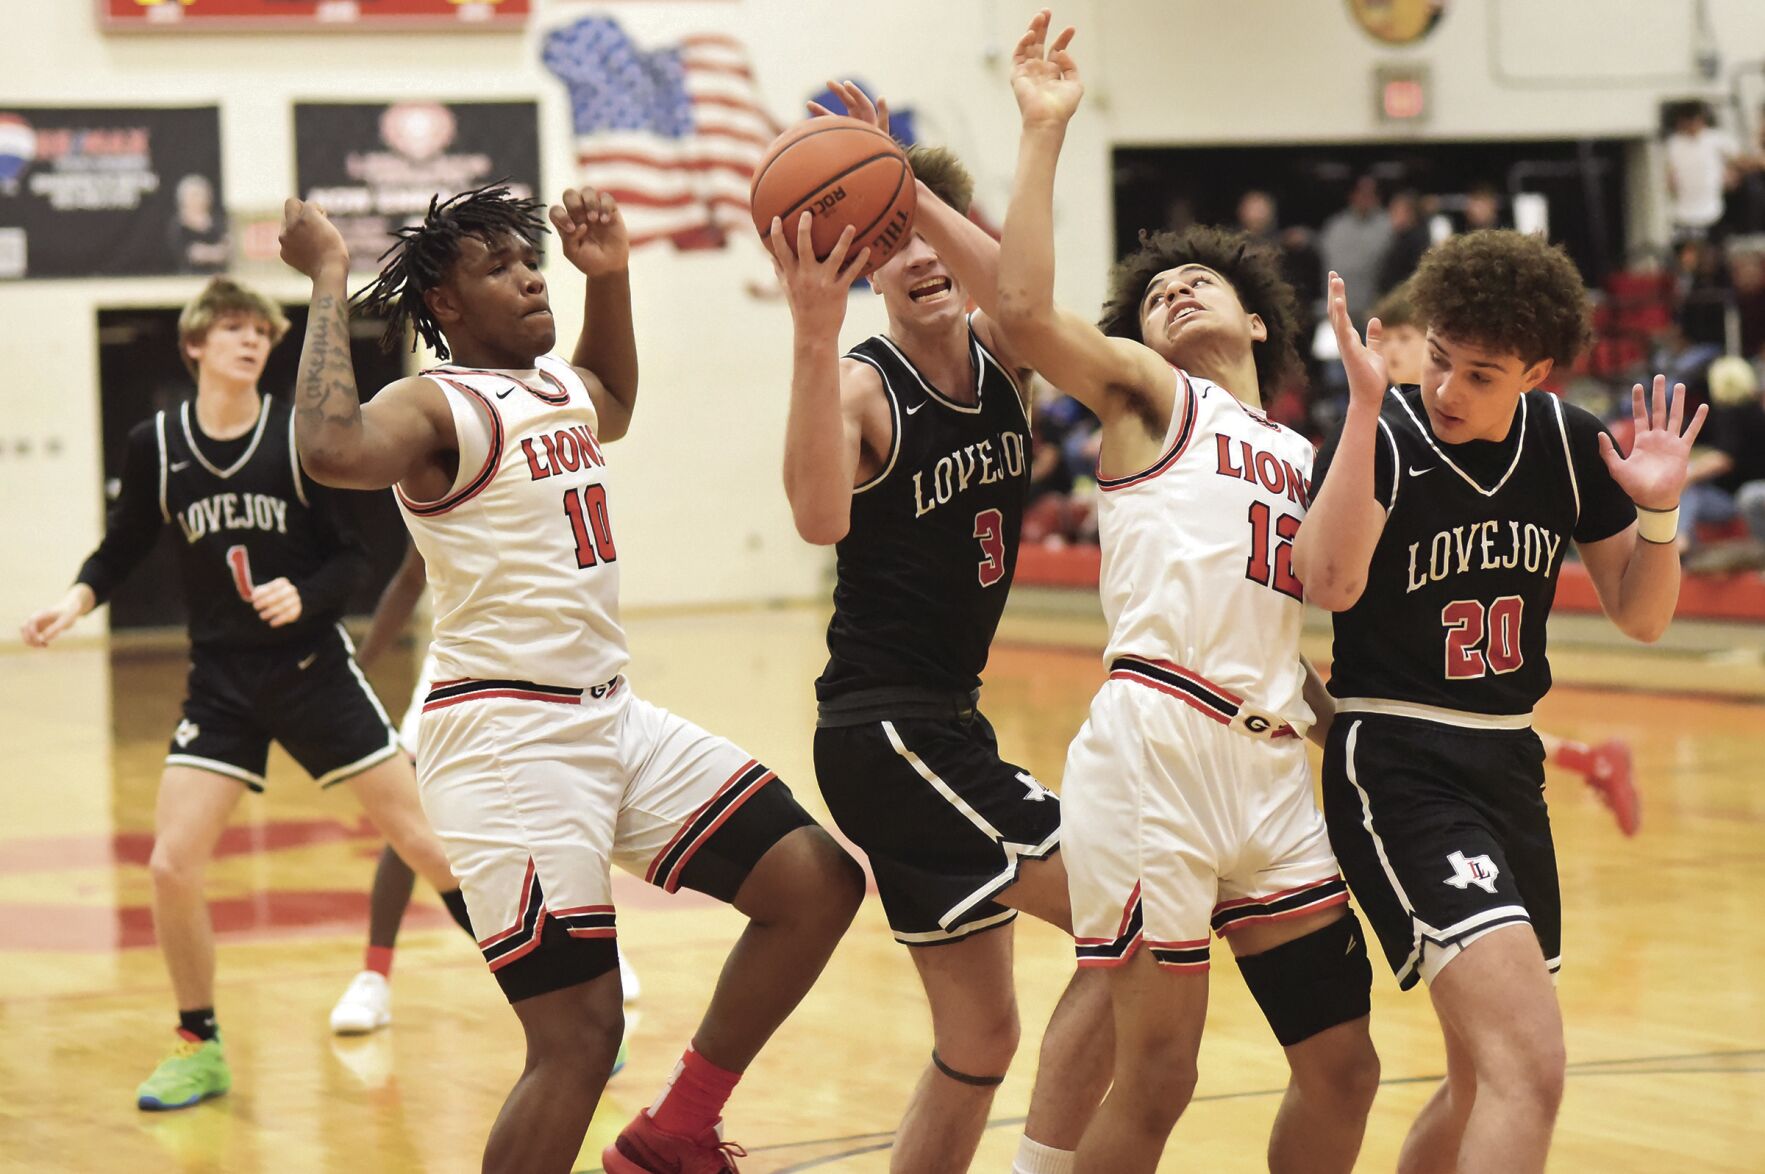 Exciting Basketball Results: Greenville Lions, Lovejoy Girls, and More!